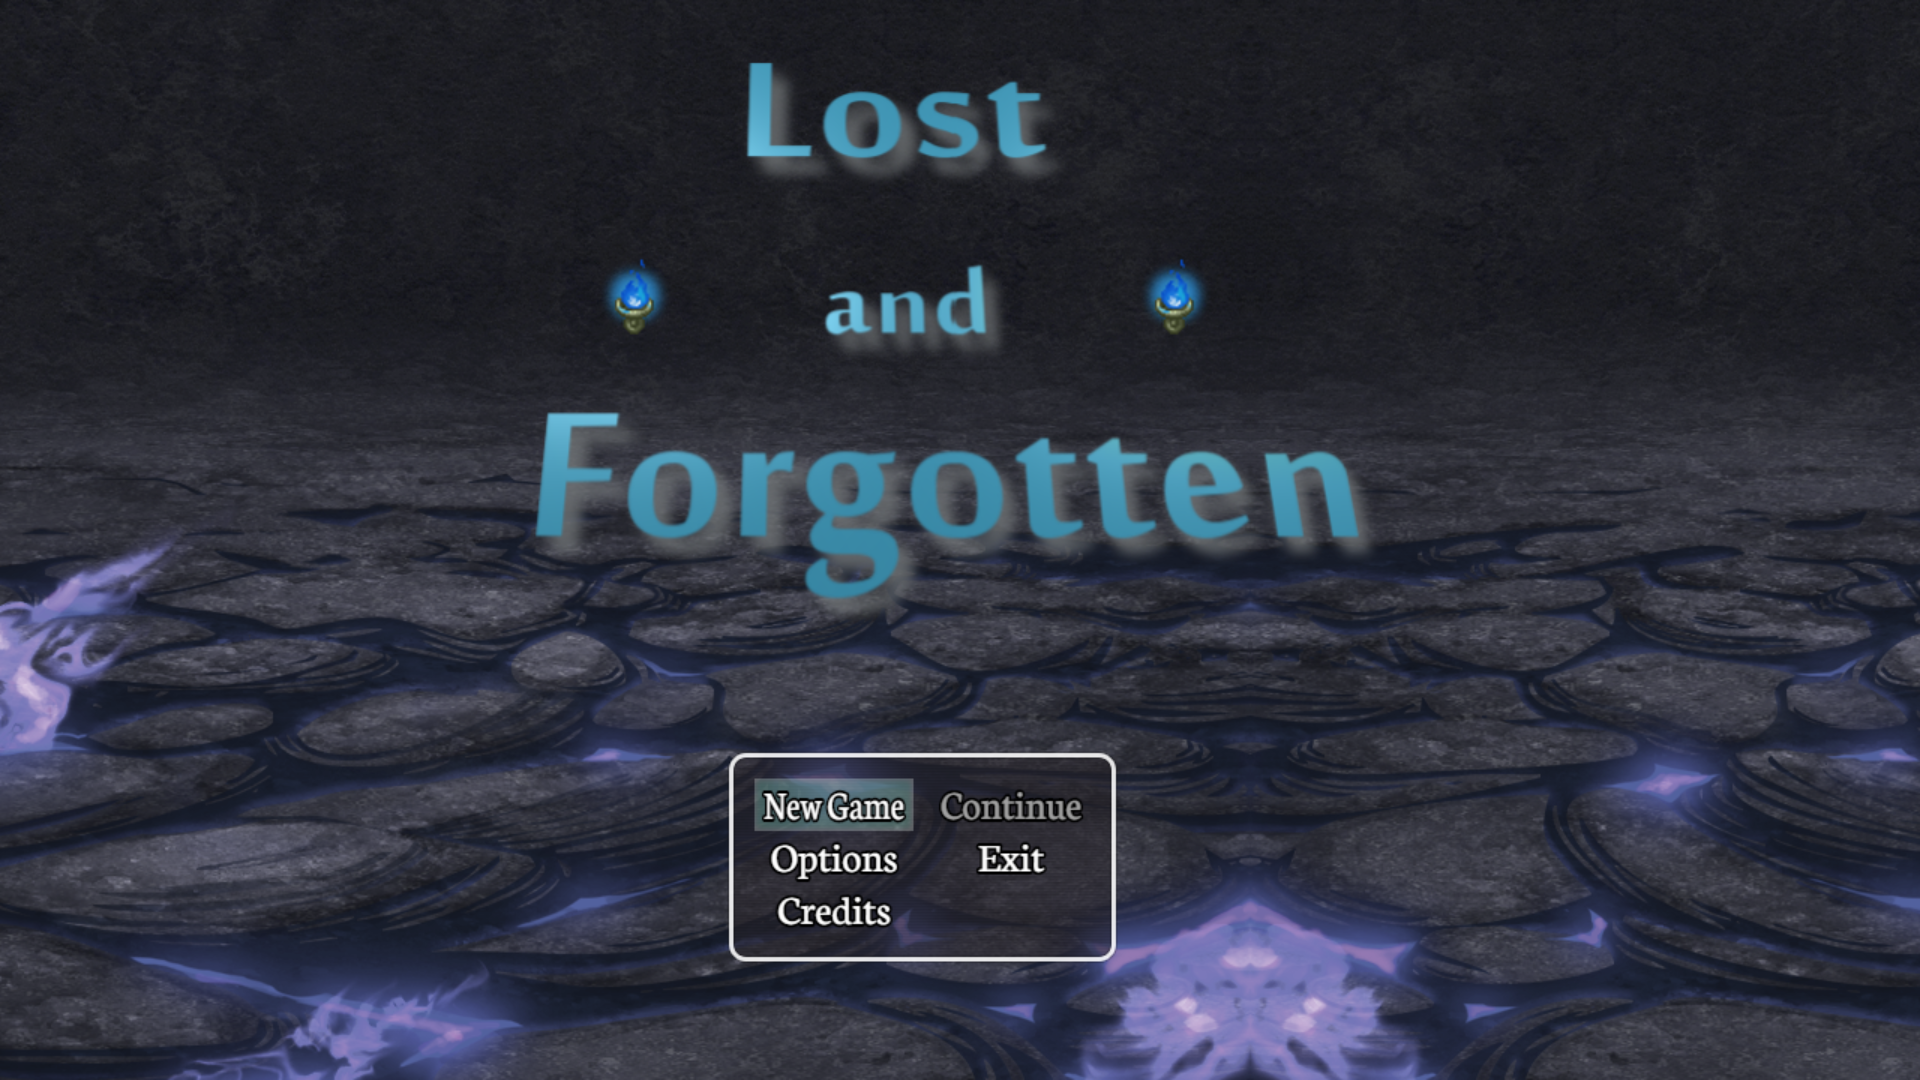 Lost and Forgotten